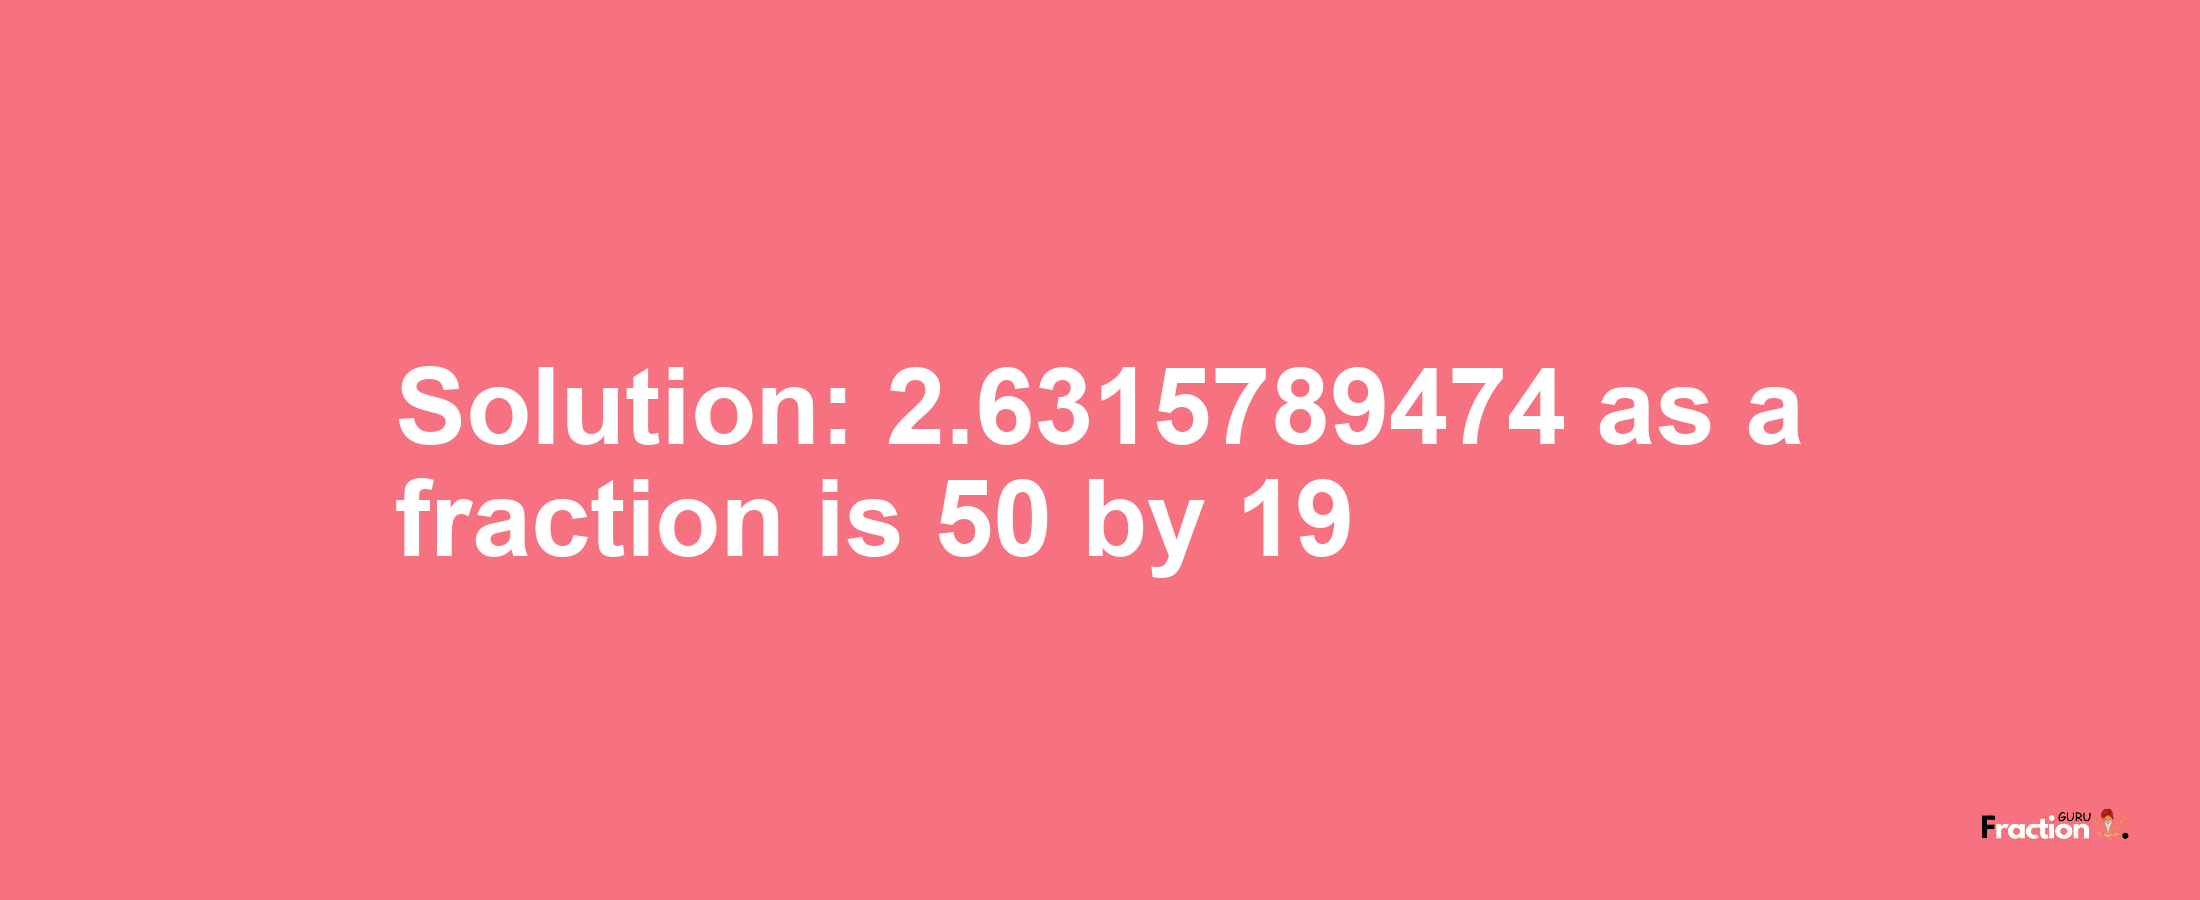 Solution:2.6315789474 as a fraction is 50/19